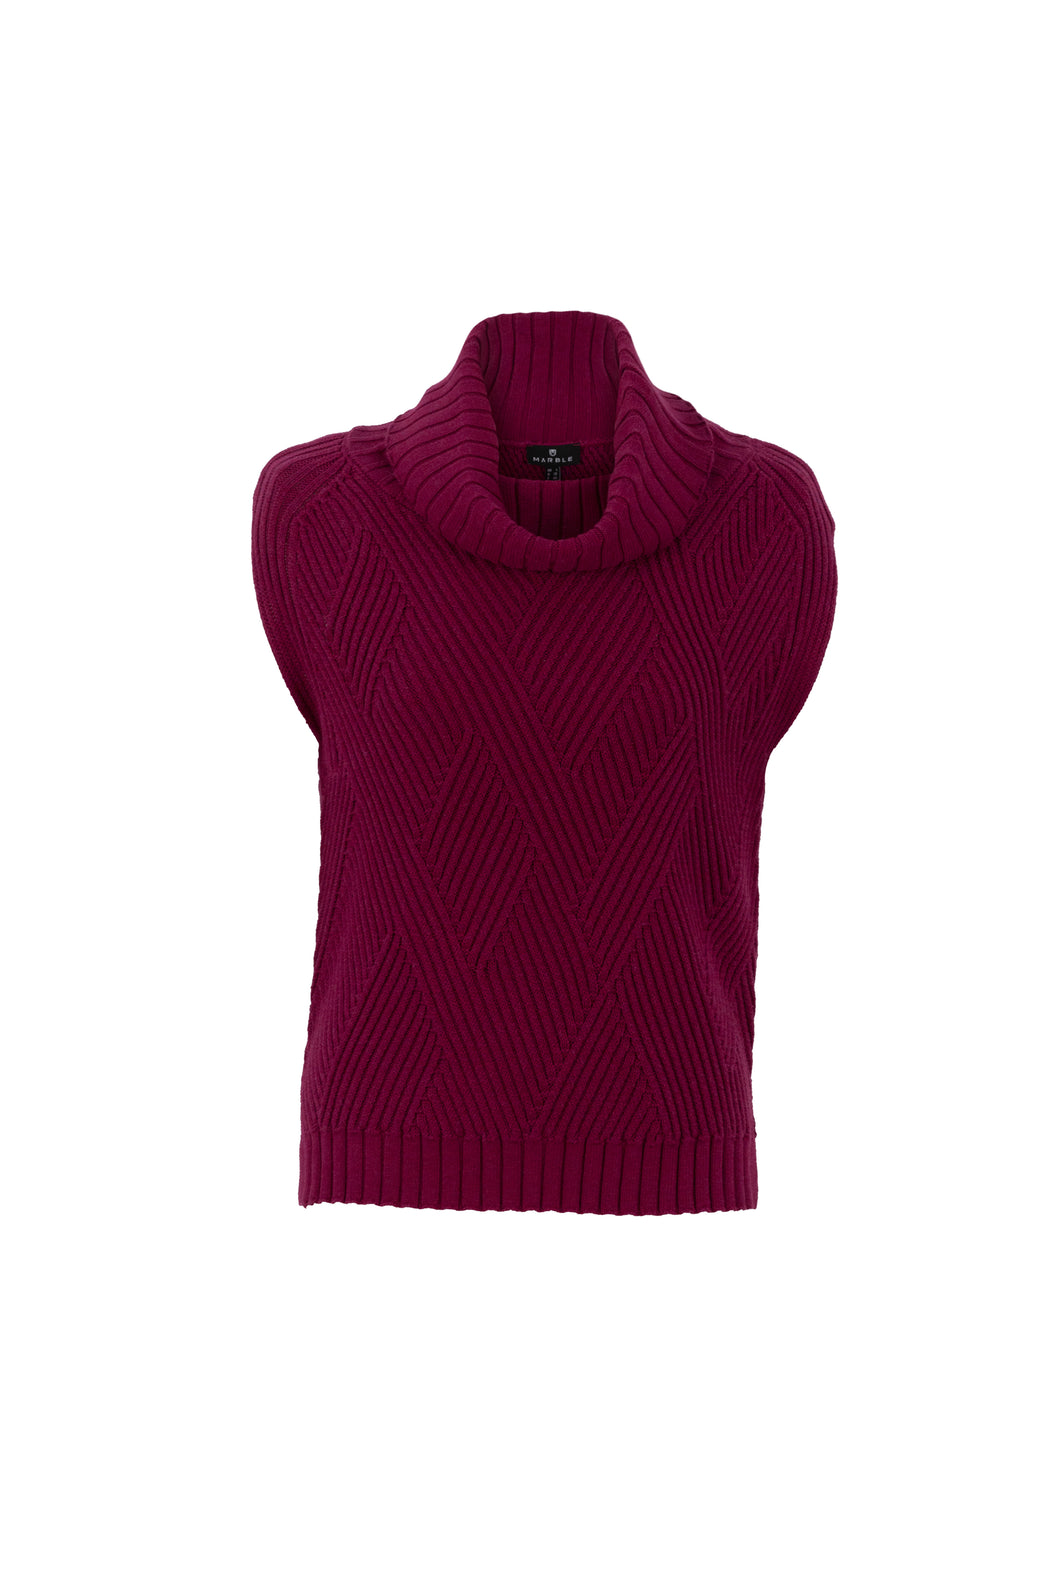 MARBLE FASHIONS 6755 SWEATER COLOUR 205 - BERRY